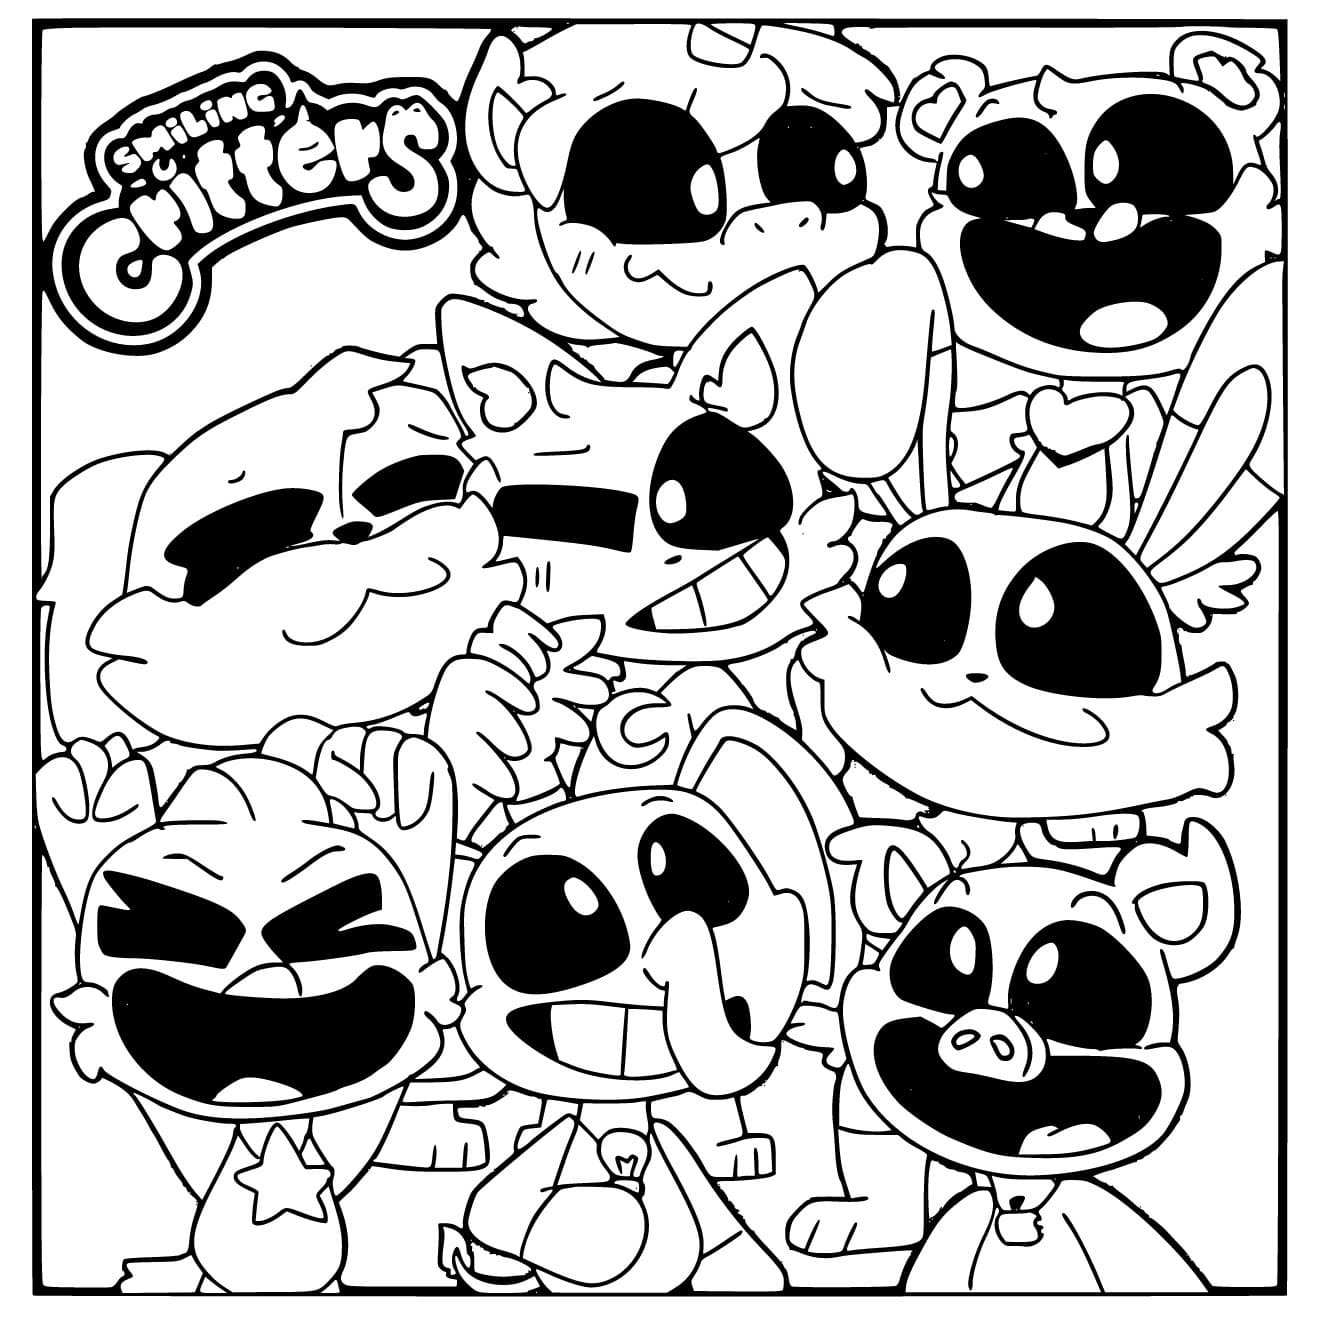 Coloriage Smiling Critters